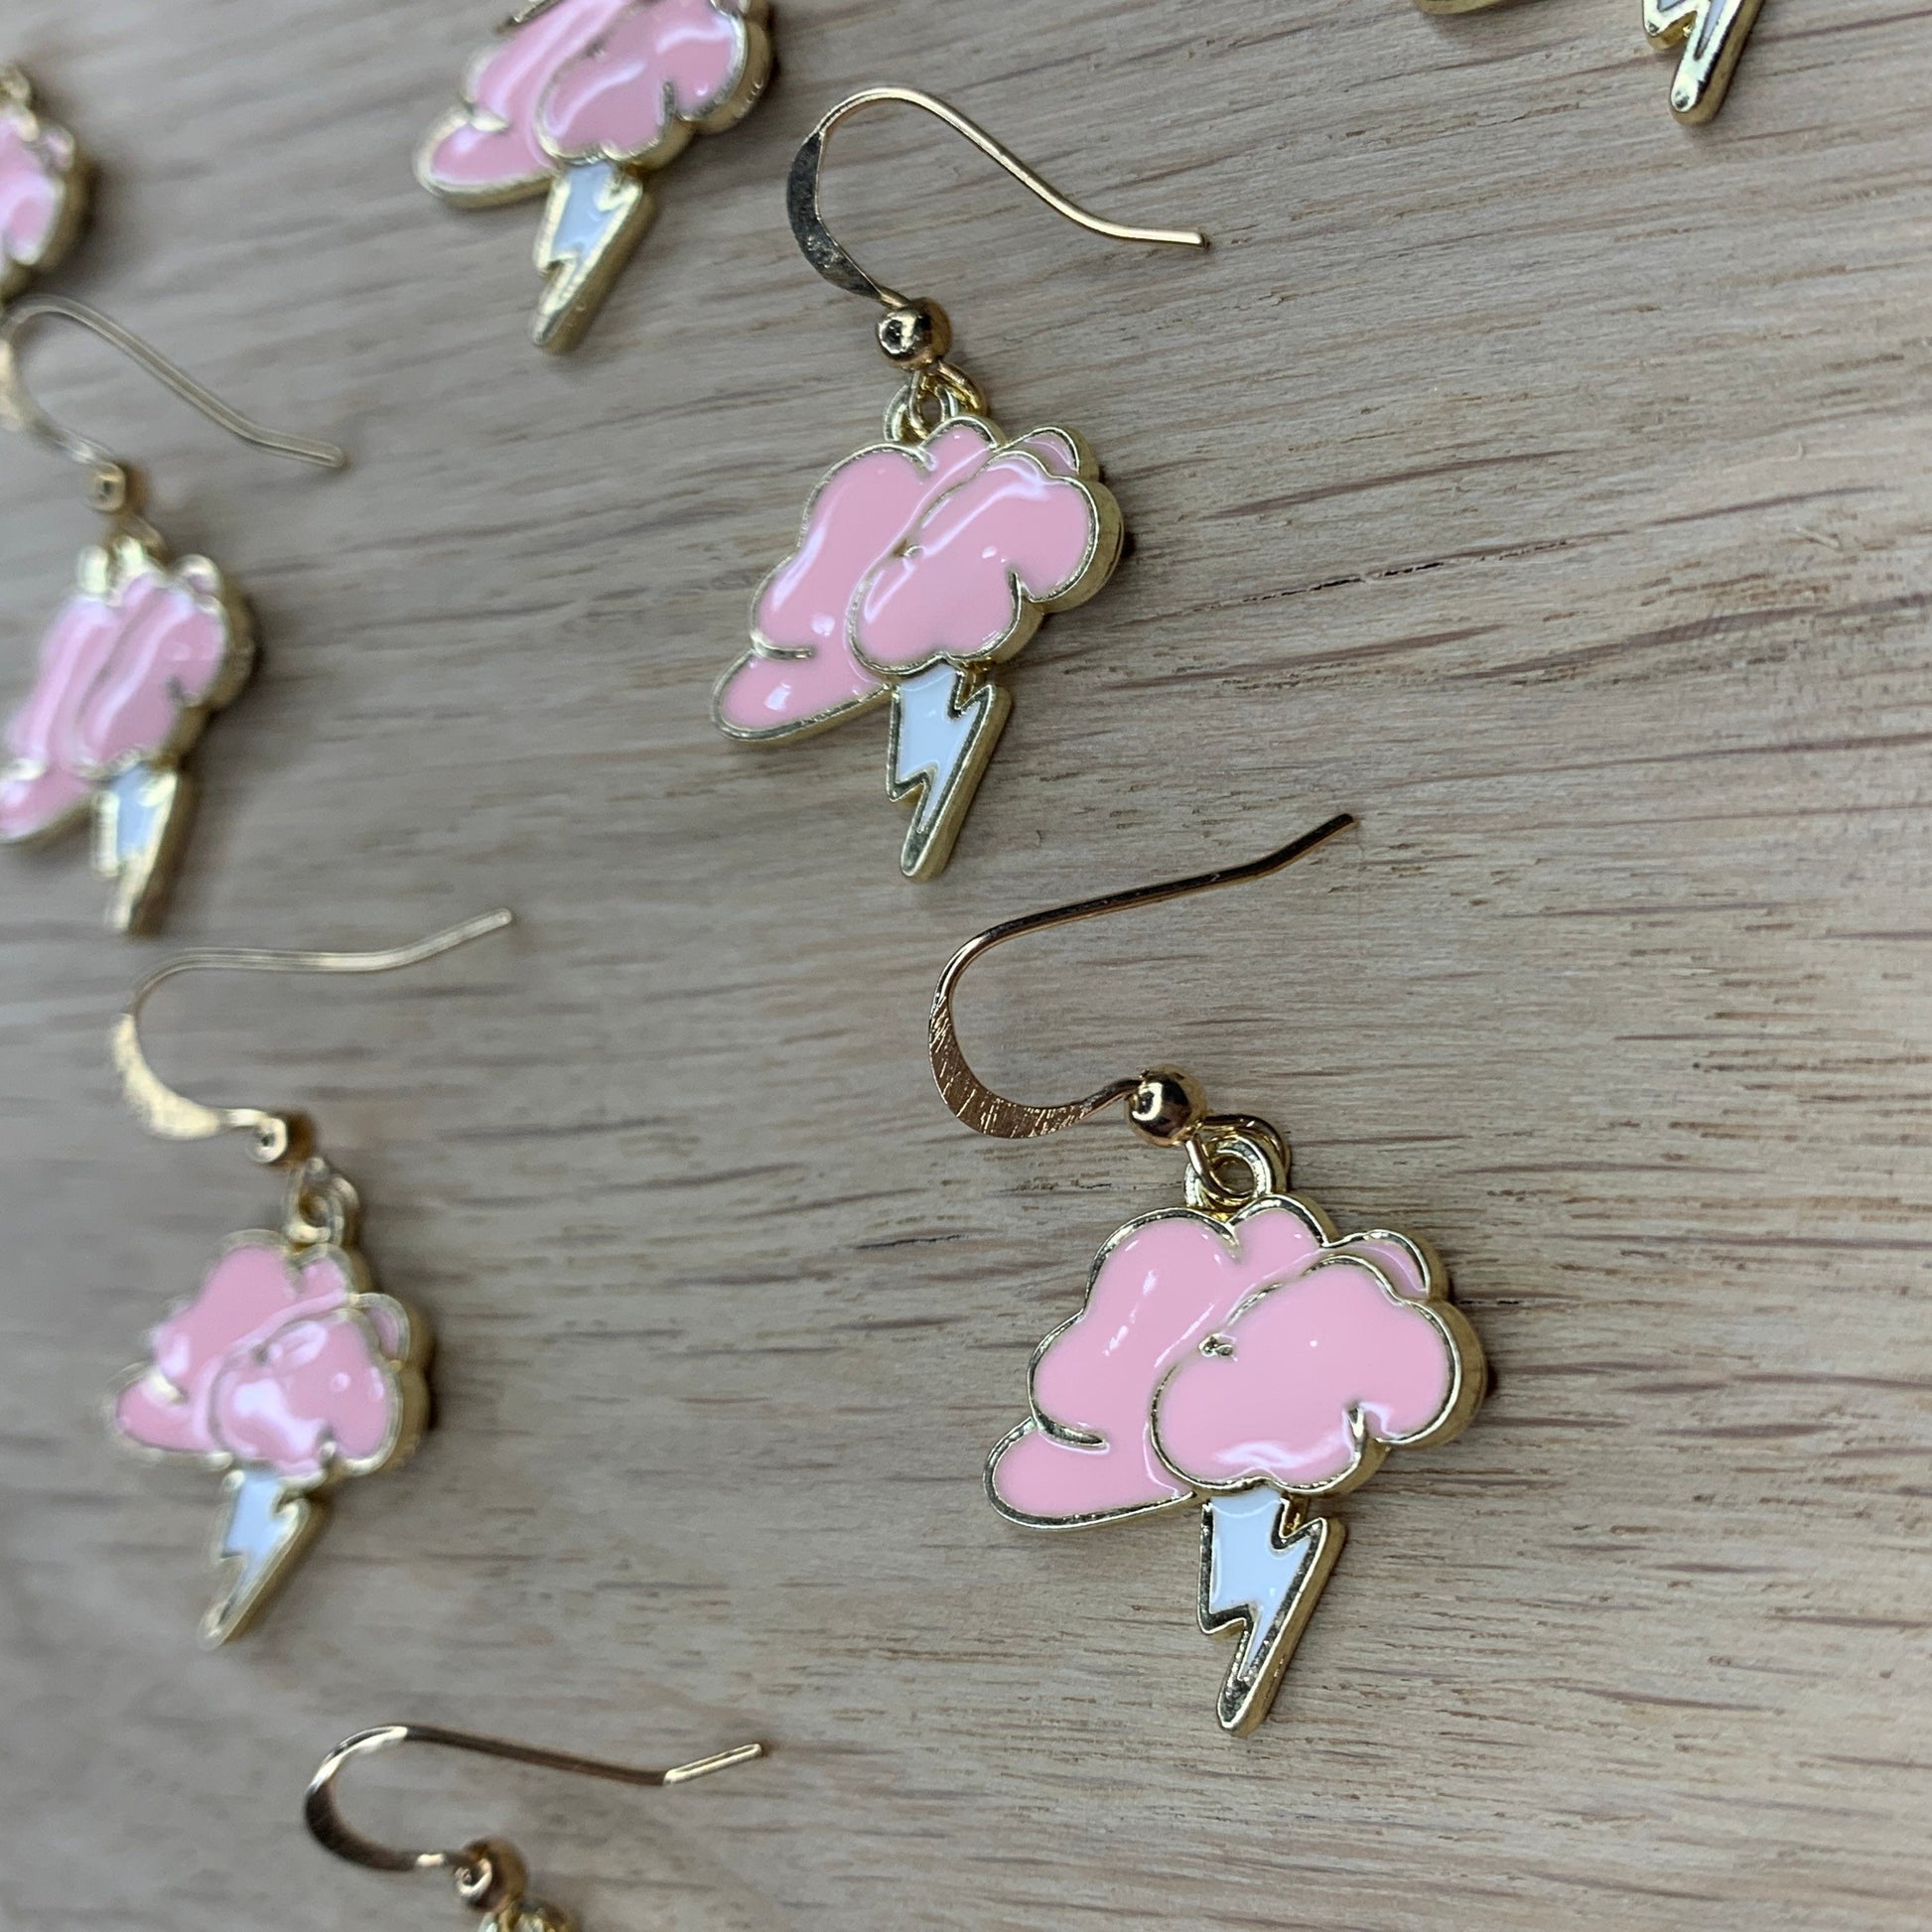 Gold and Pink Cloud with Lightning Bolt Earrings - Lxyclr Authentic